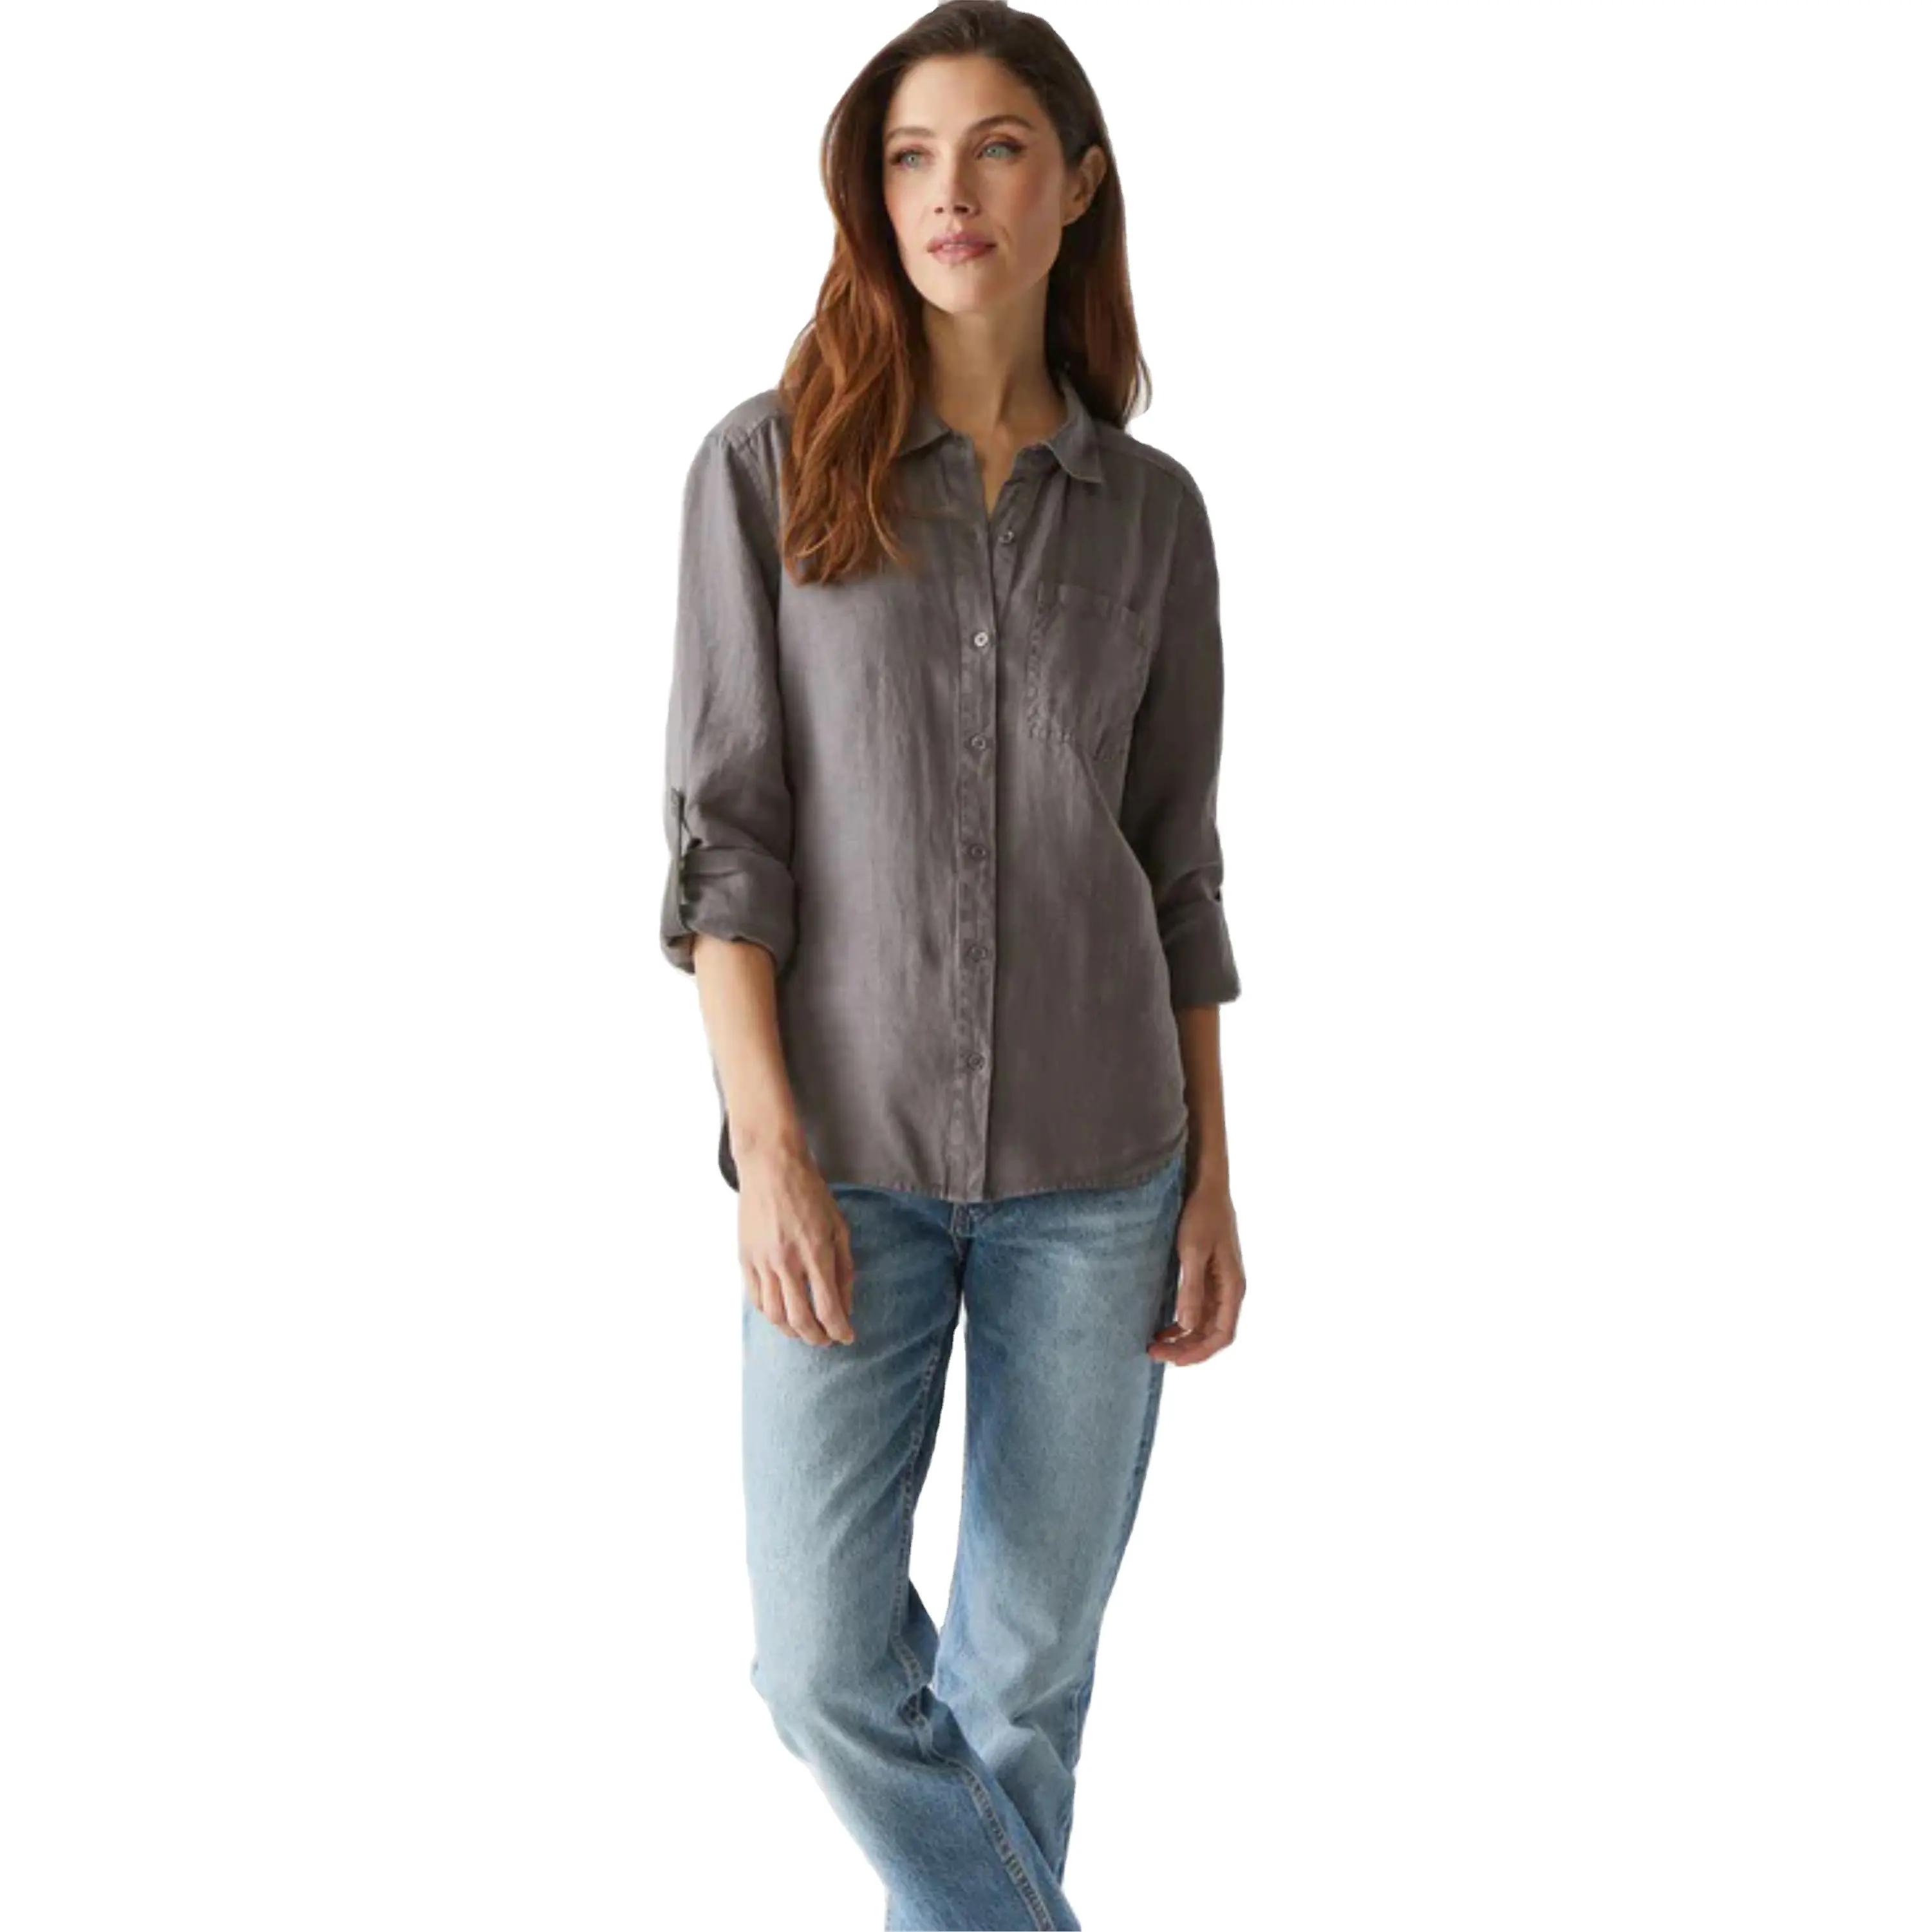 Casual Denim Button-Down Shirt for Women - Stylish and Durable, Great for Daily Wear, Available in Classic Blue and Dark Washes